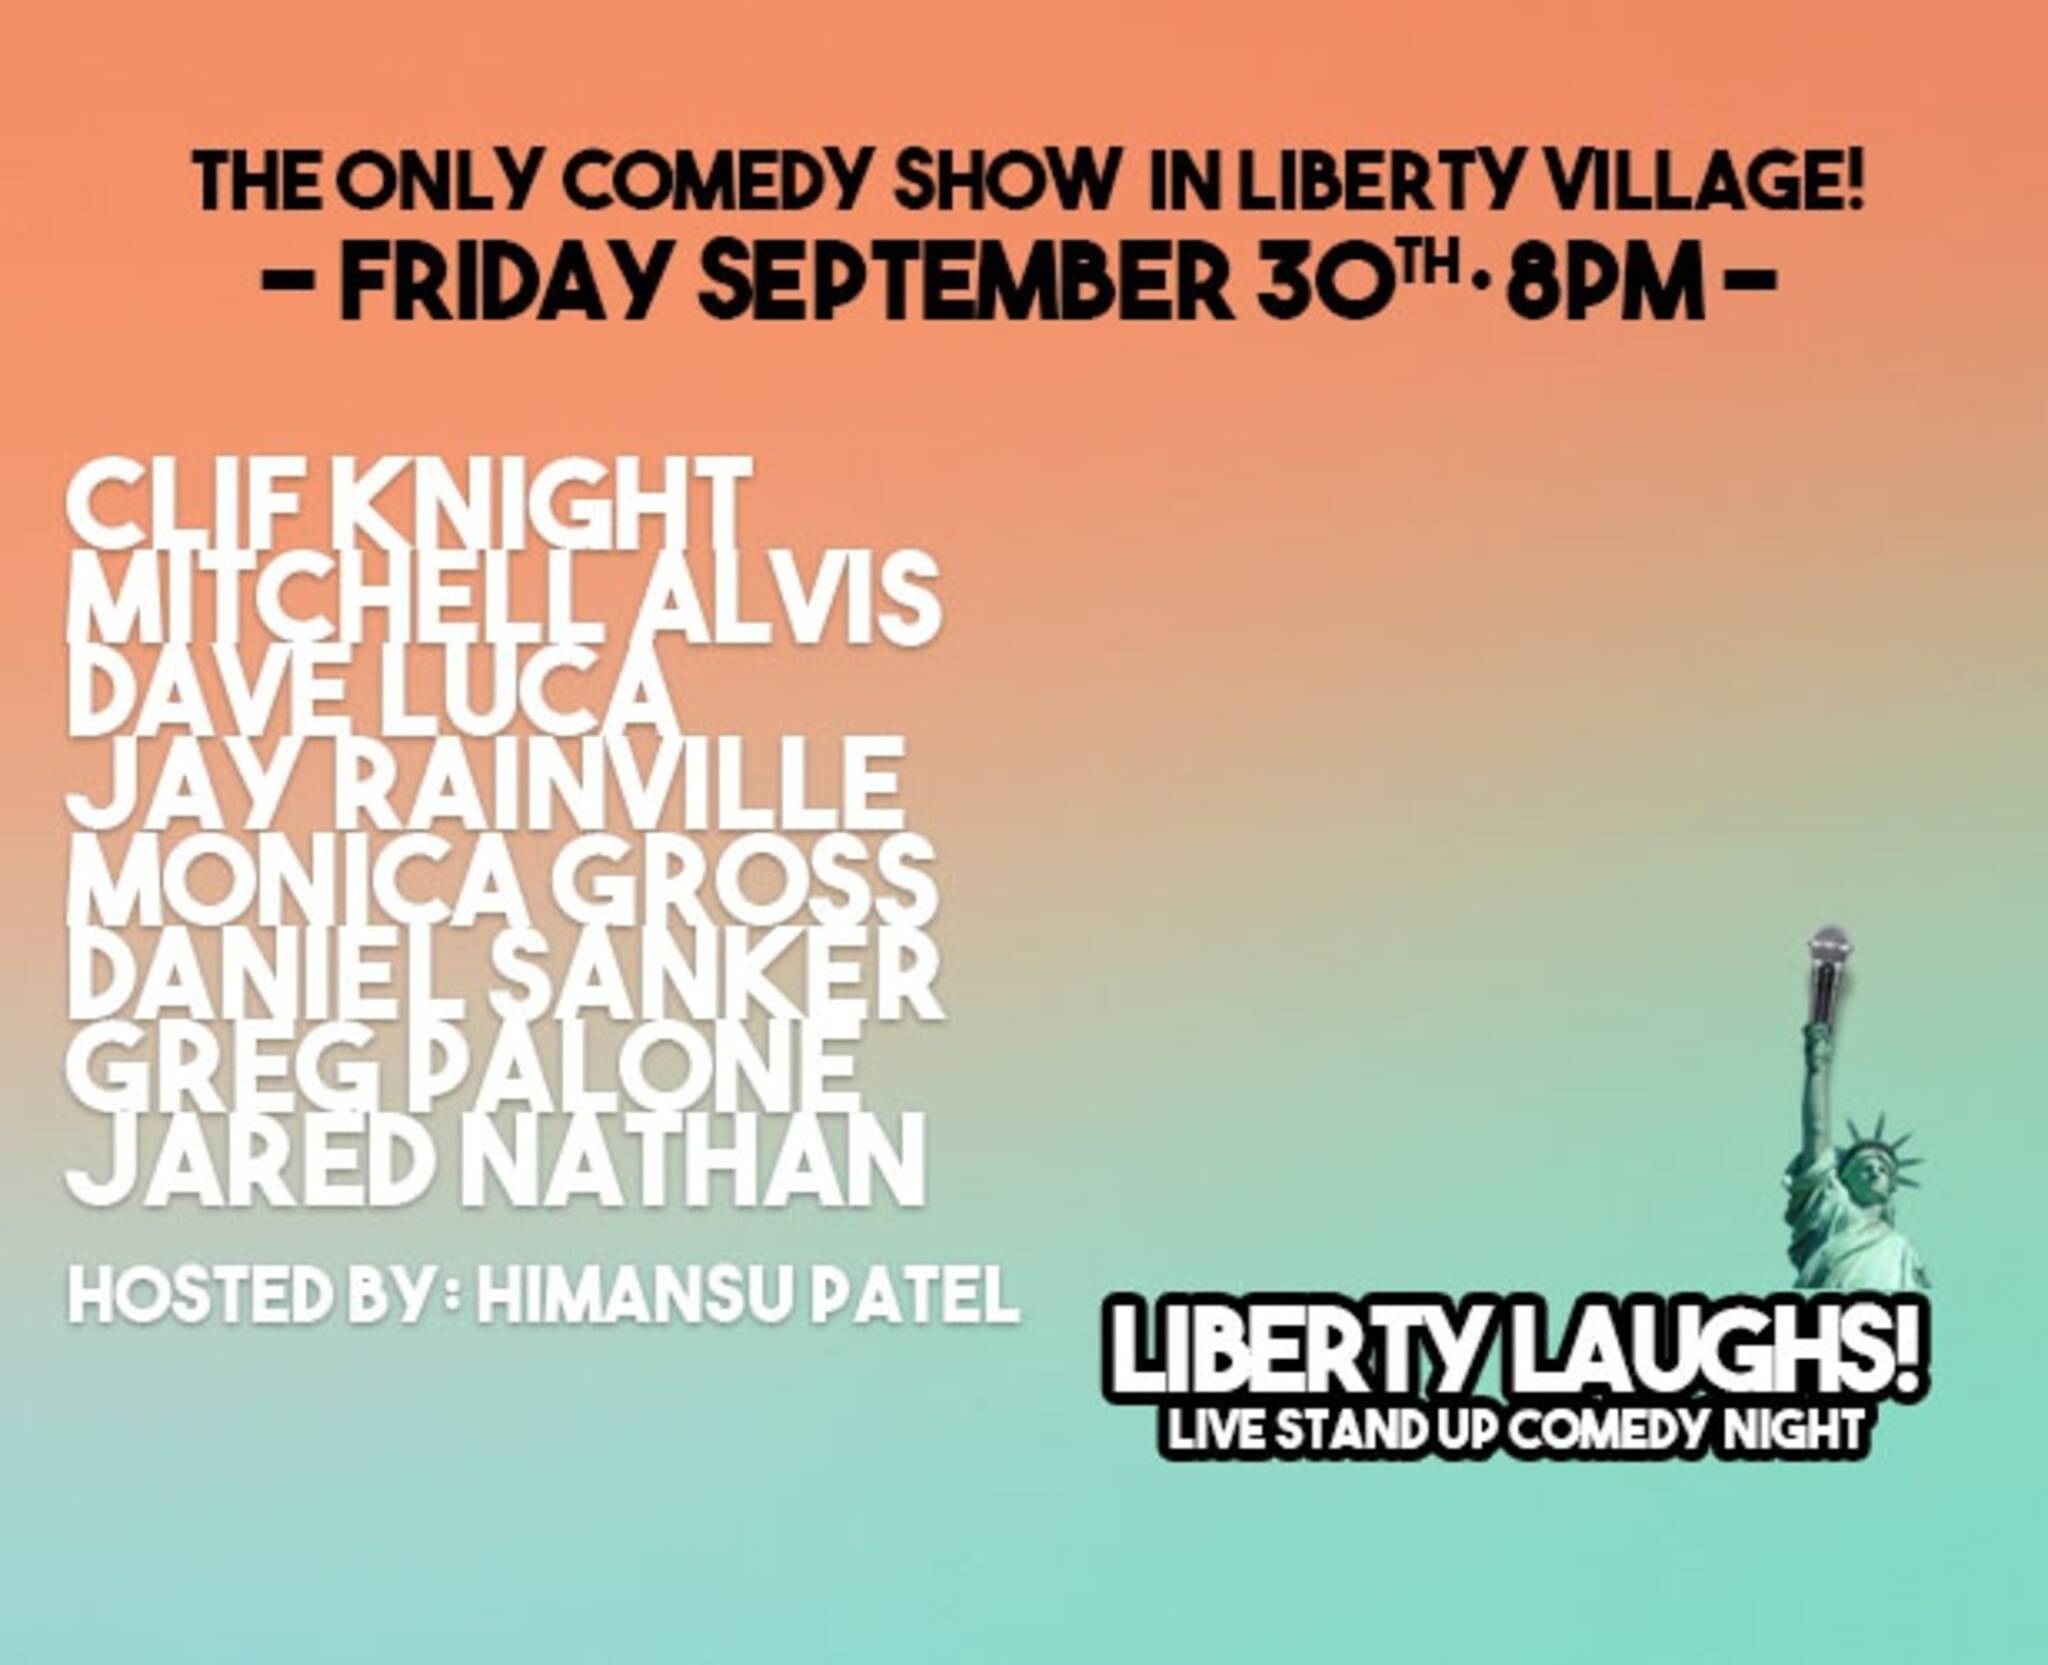 Liberty Laughs Comedy